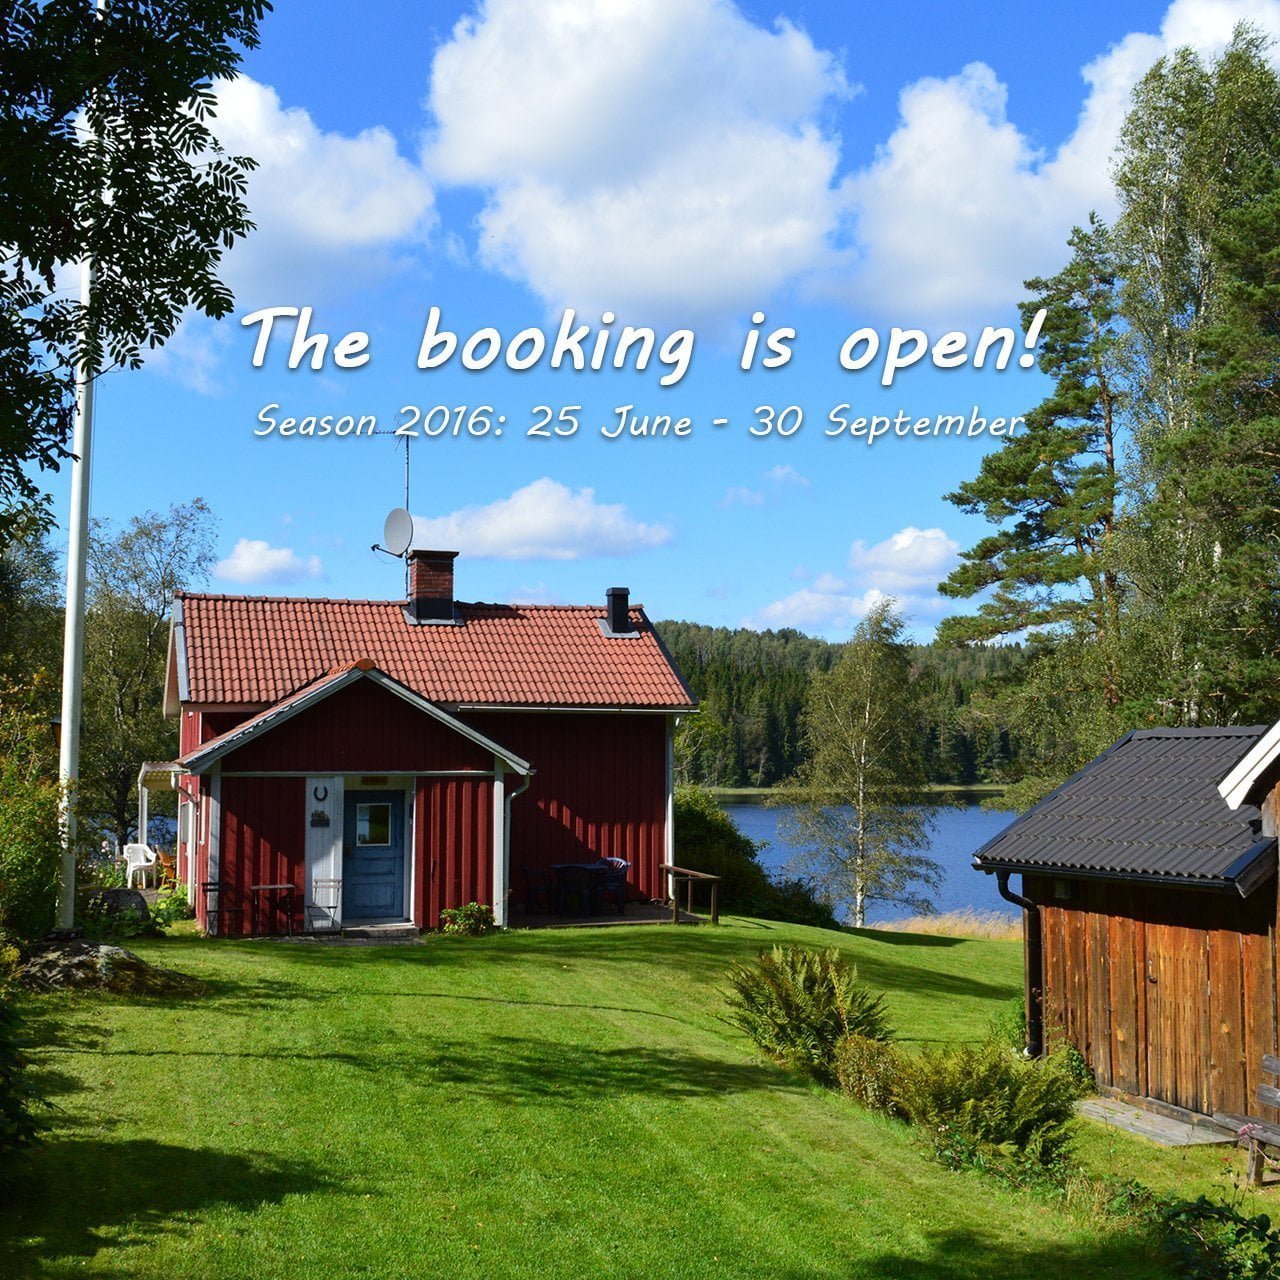 Rent a Cottage in Dalsland, Sweden. The booking is open!